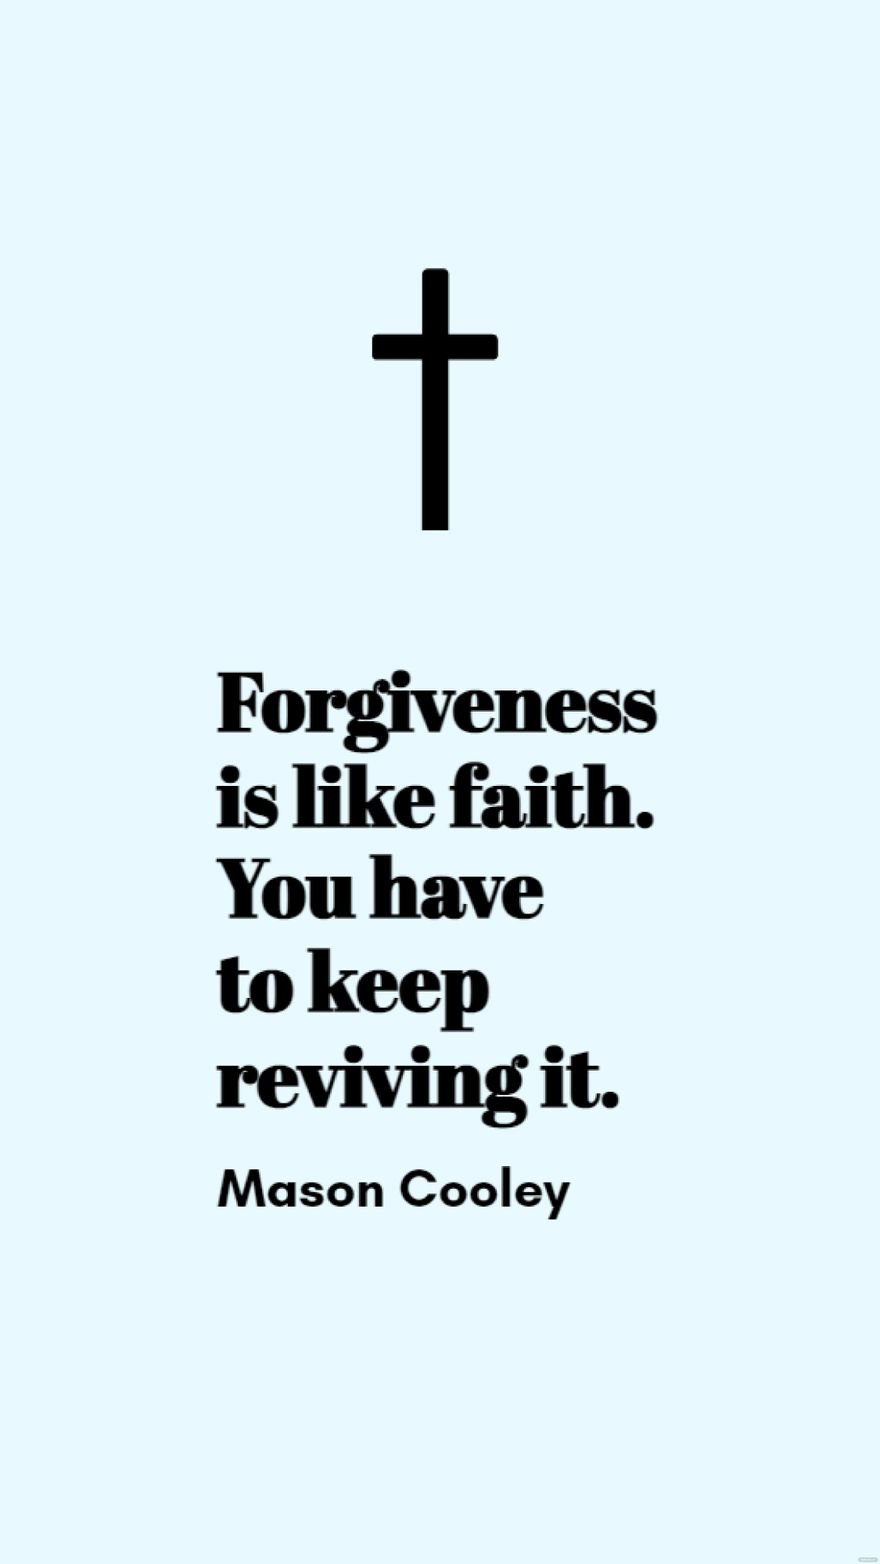 Mason Cooley - Forgiveness is like faith. You have to keep reviving it. in JPG